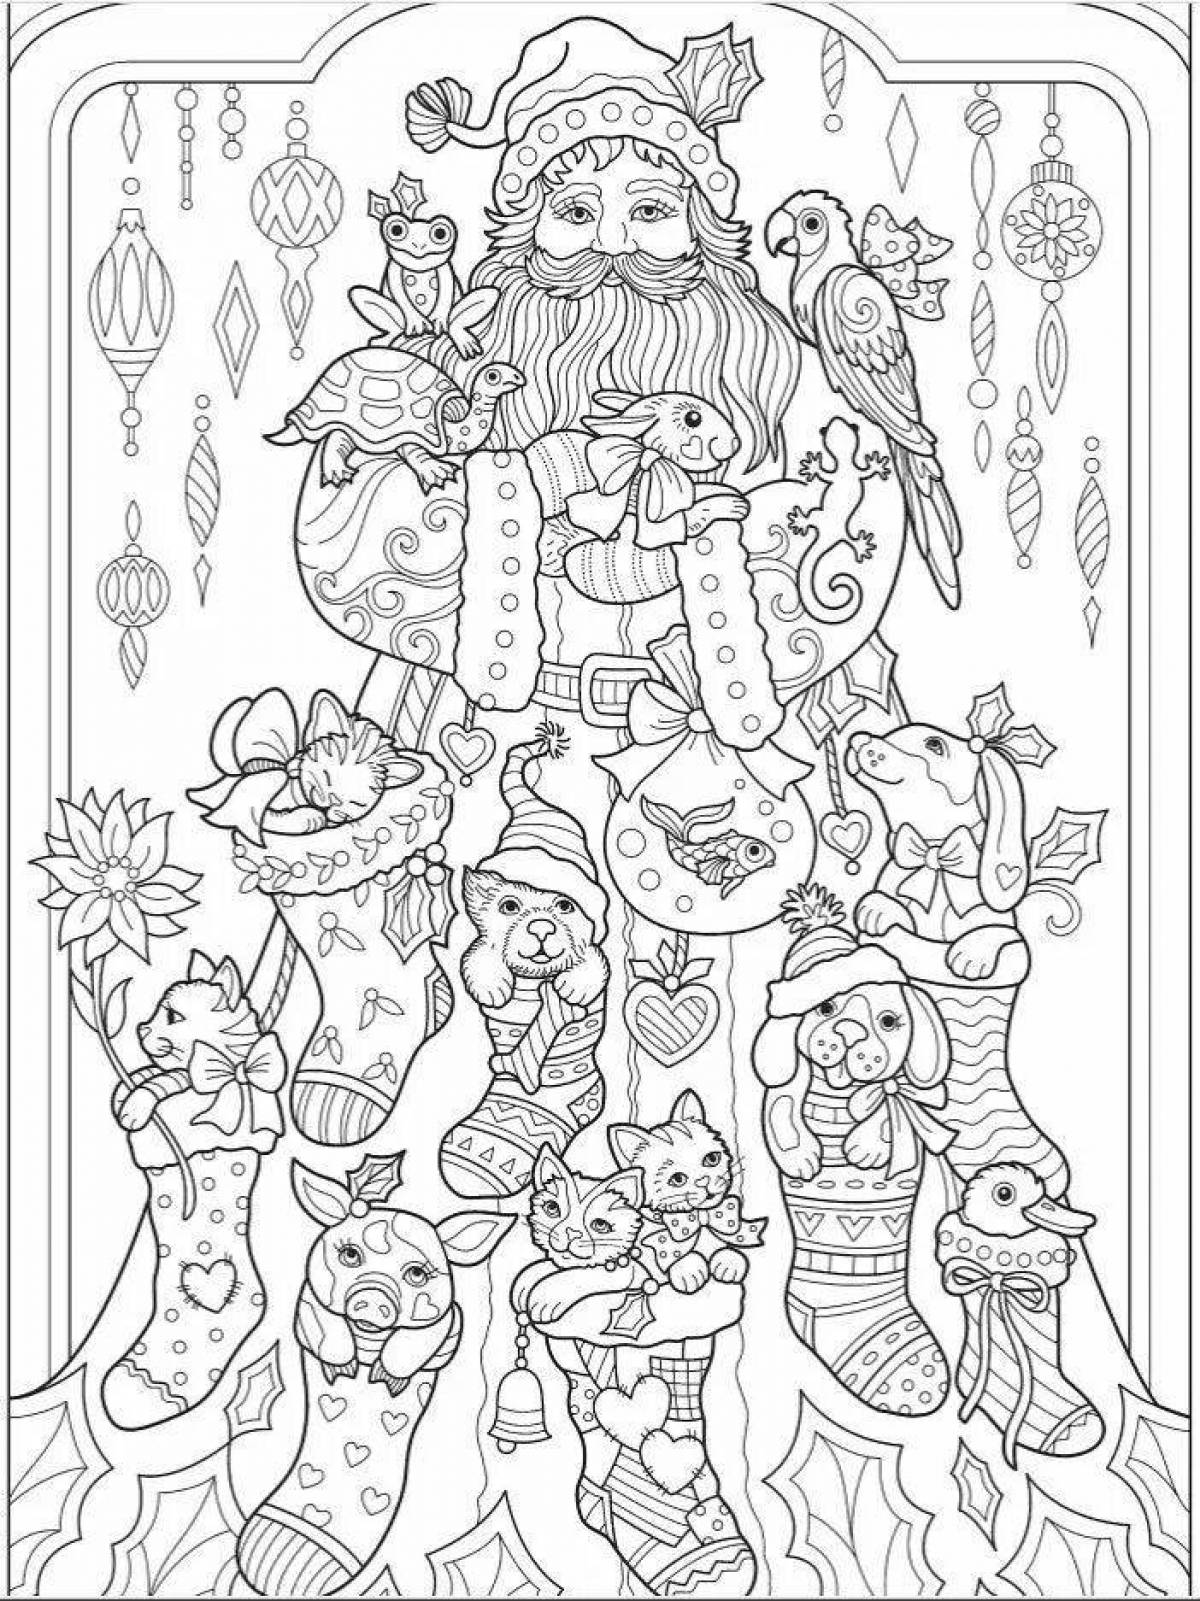 Exquisite Christmas coloring book for adults